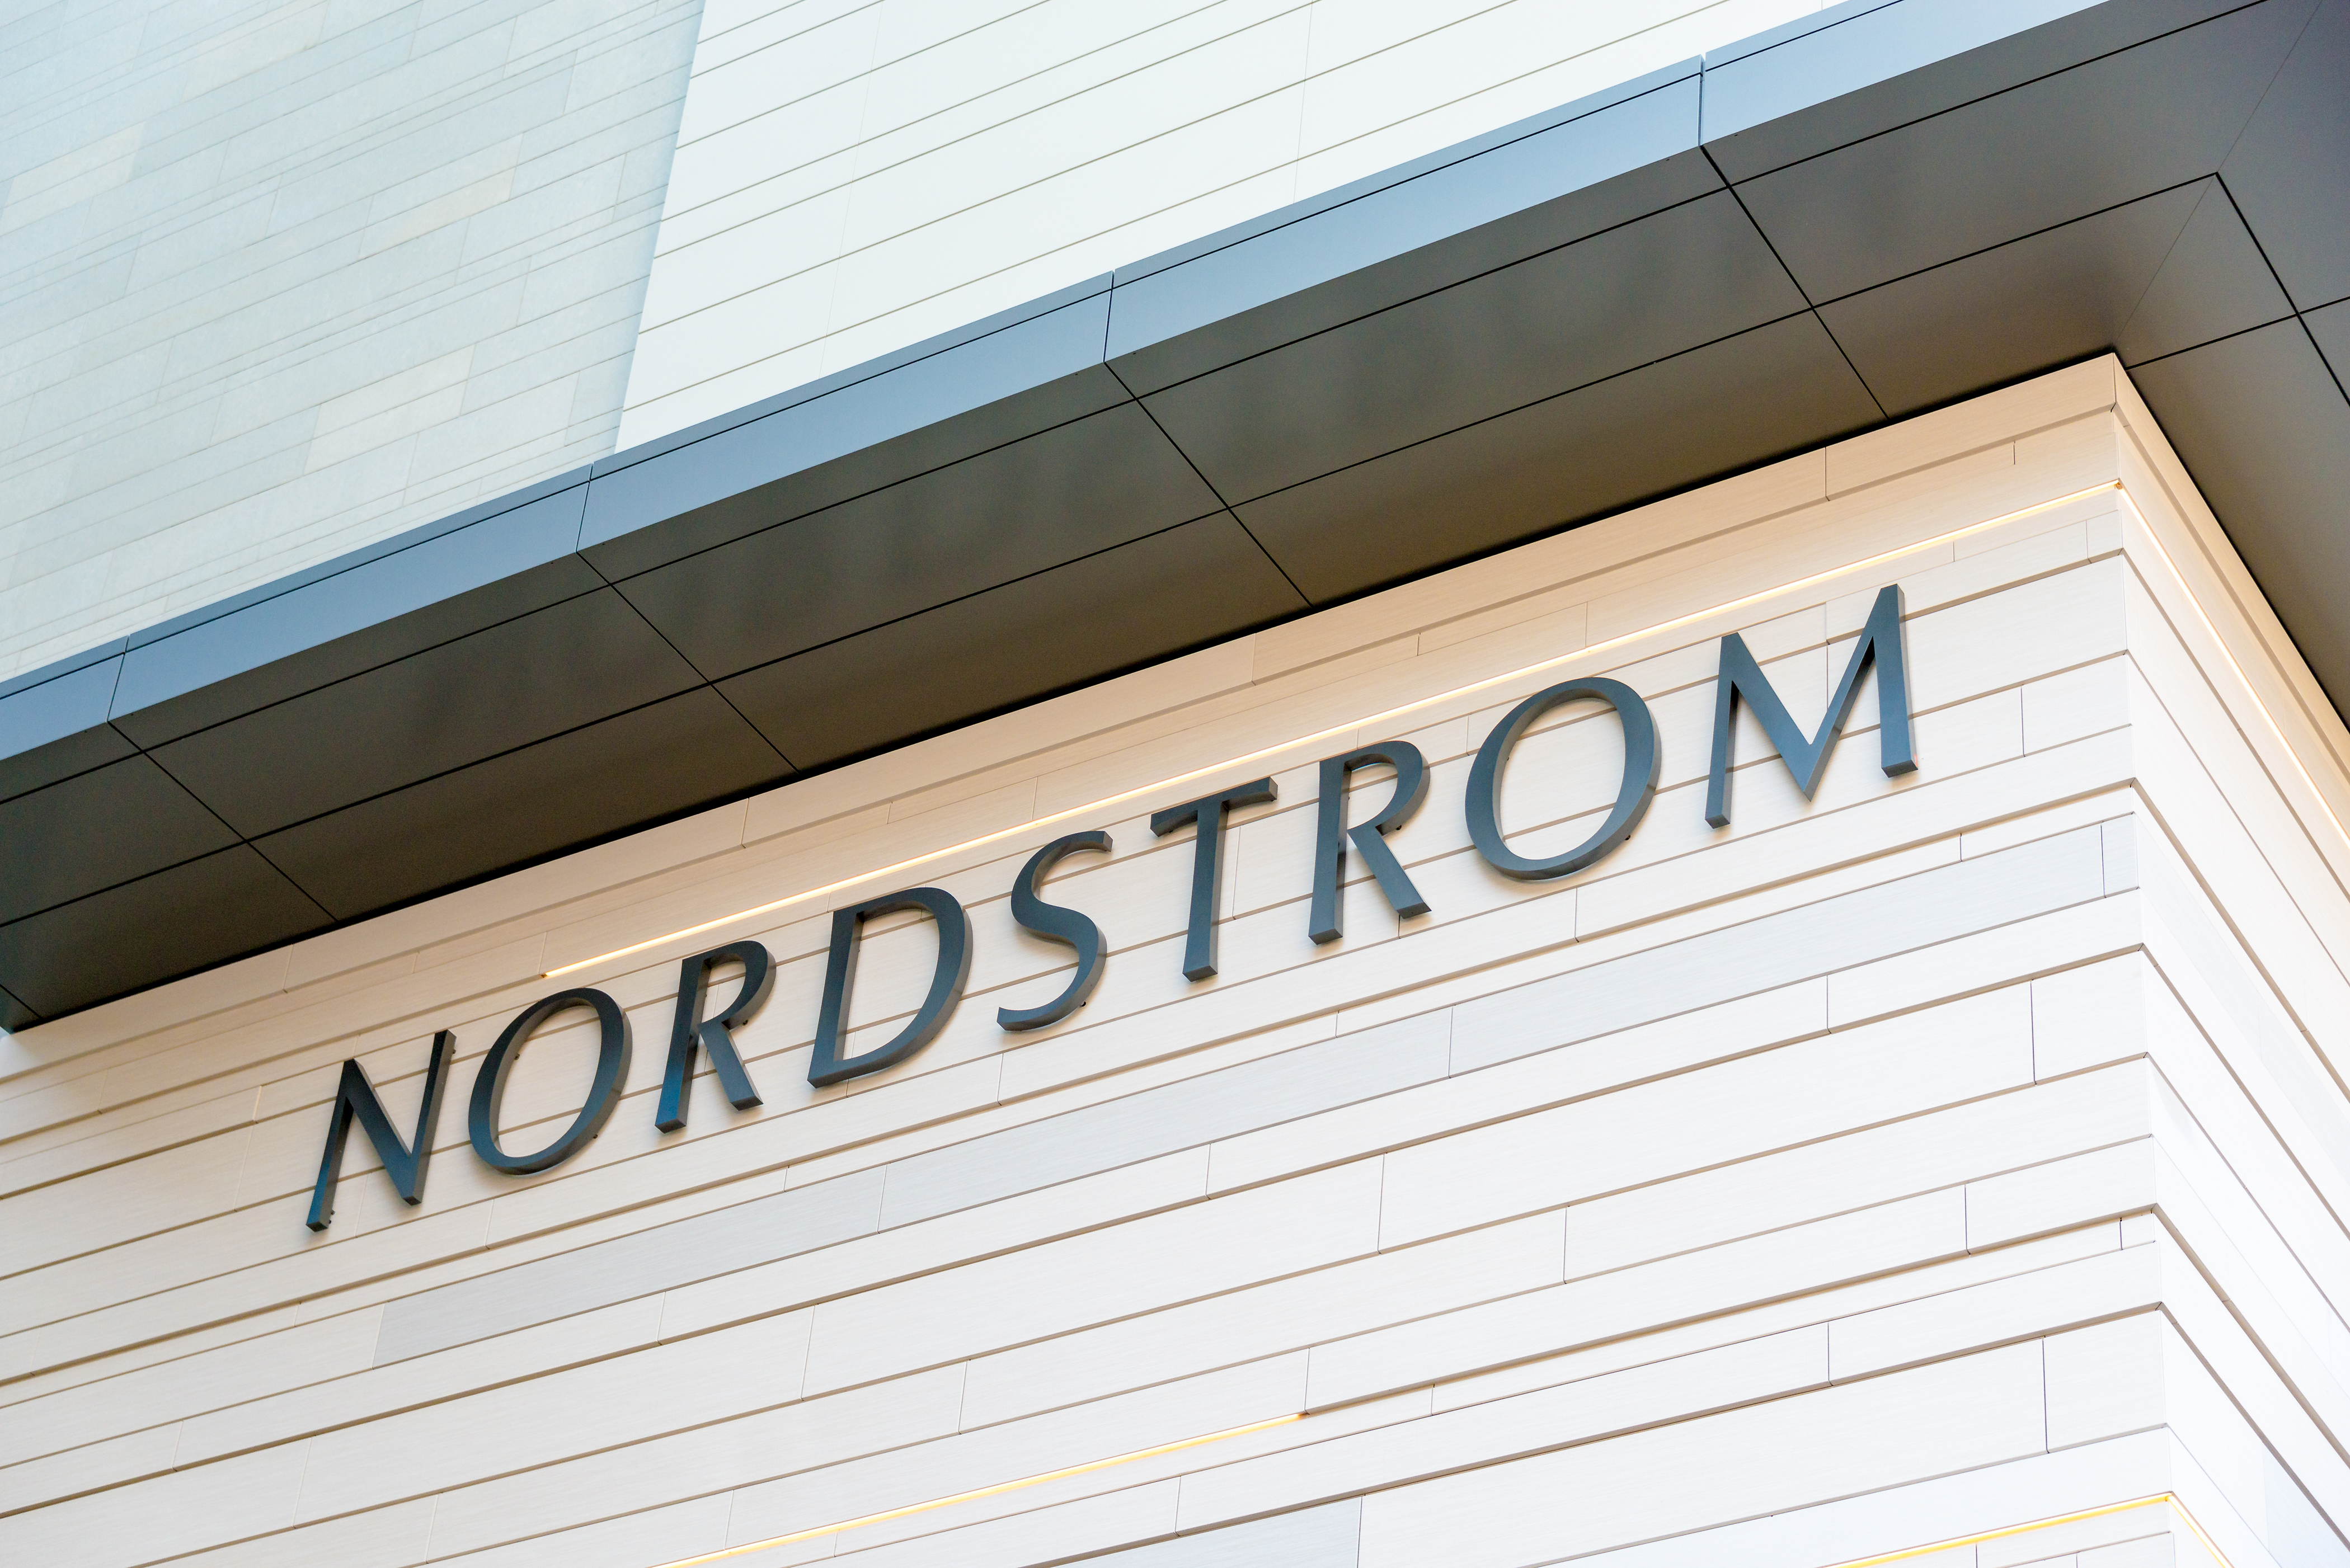 The Nordstrom store logo is pictured